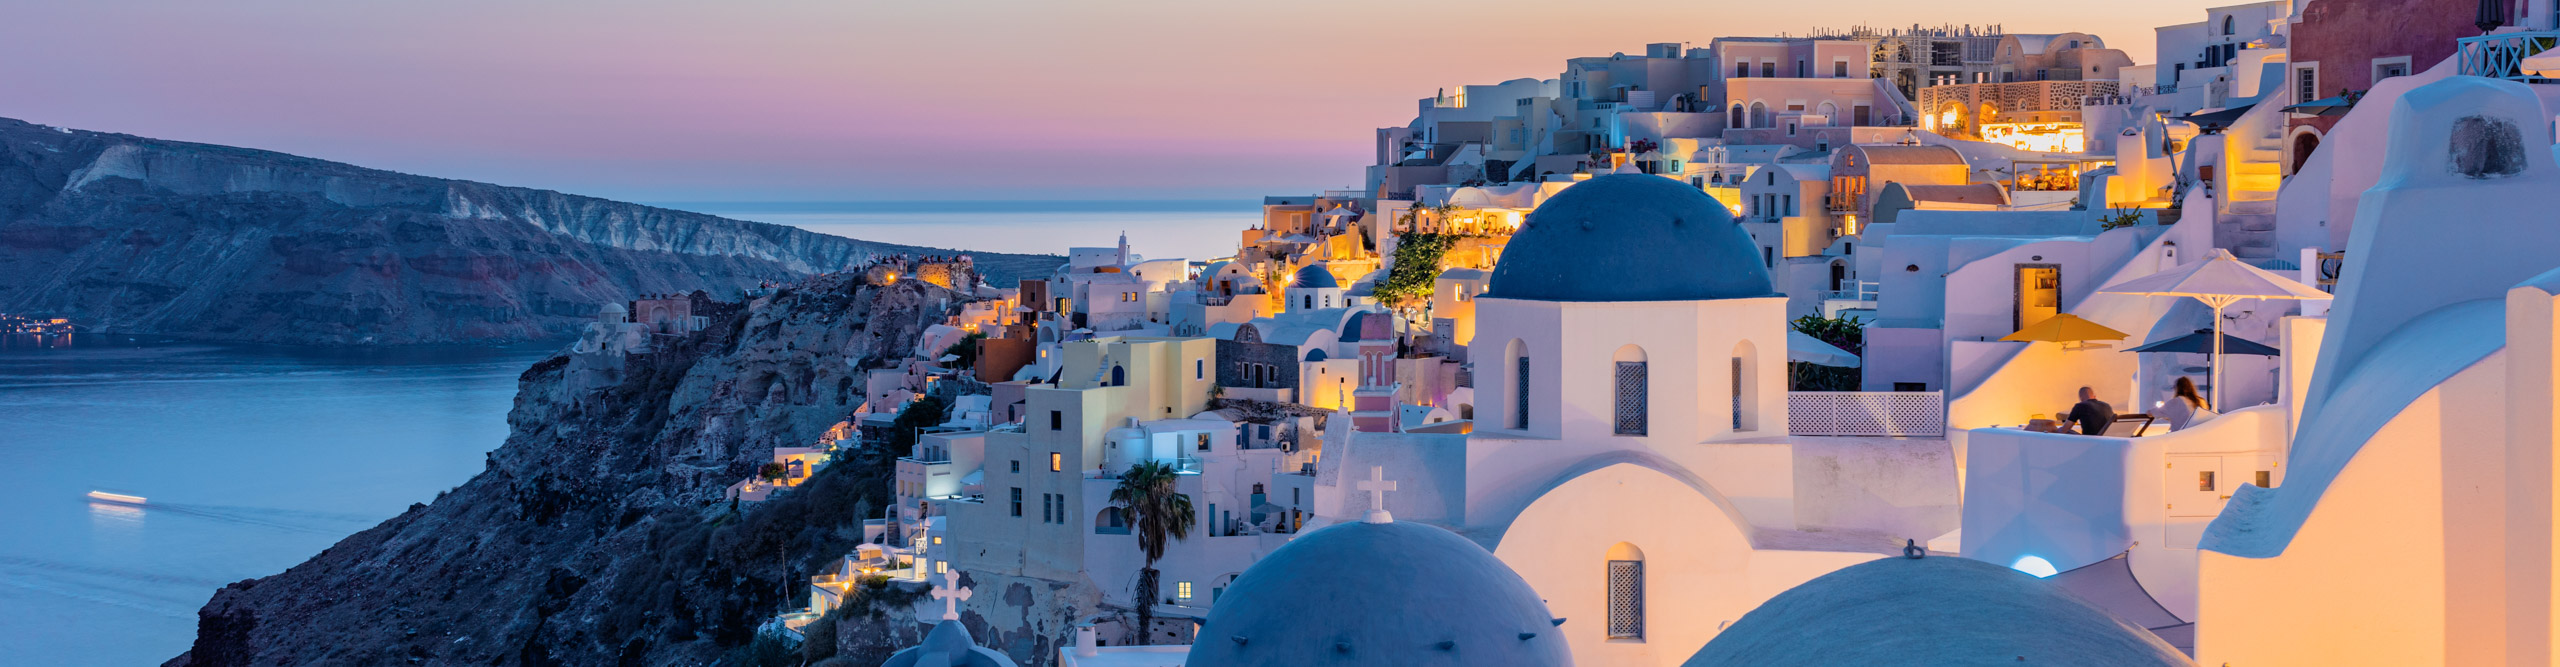 Houses and churches with blue roofs during twilight, Santorini Island, Cyclades, Greece. 